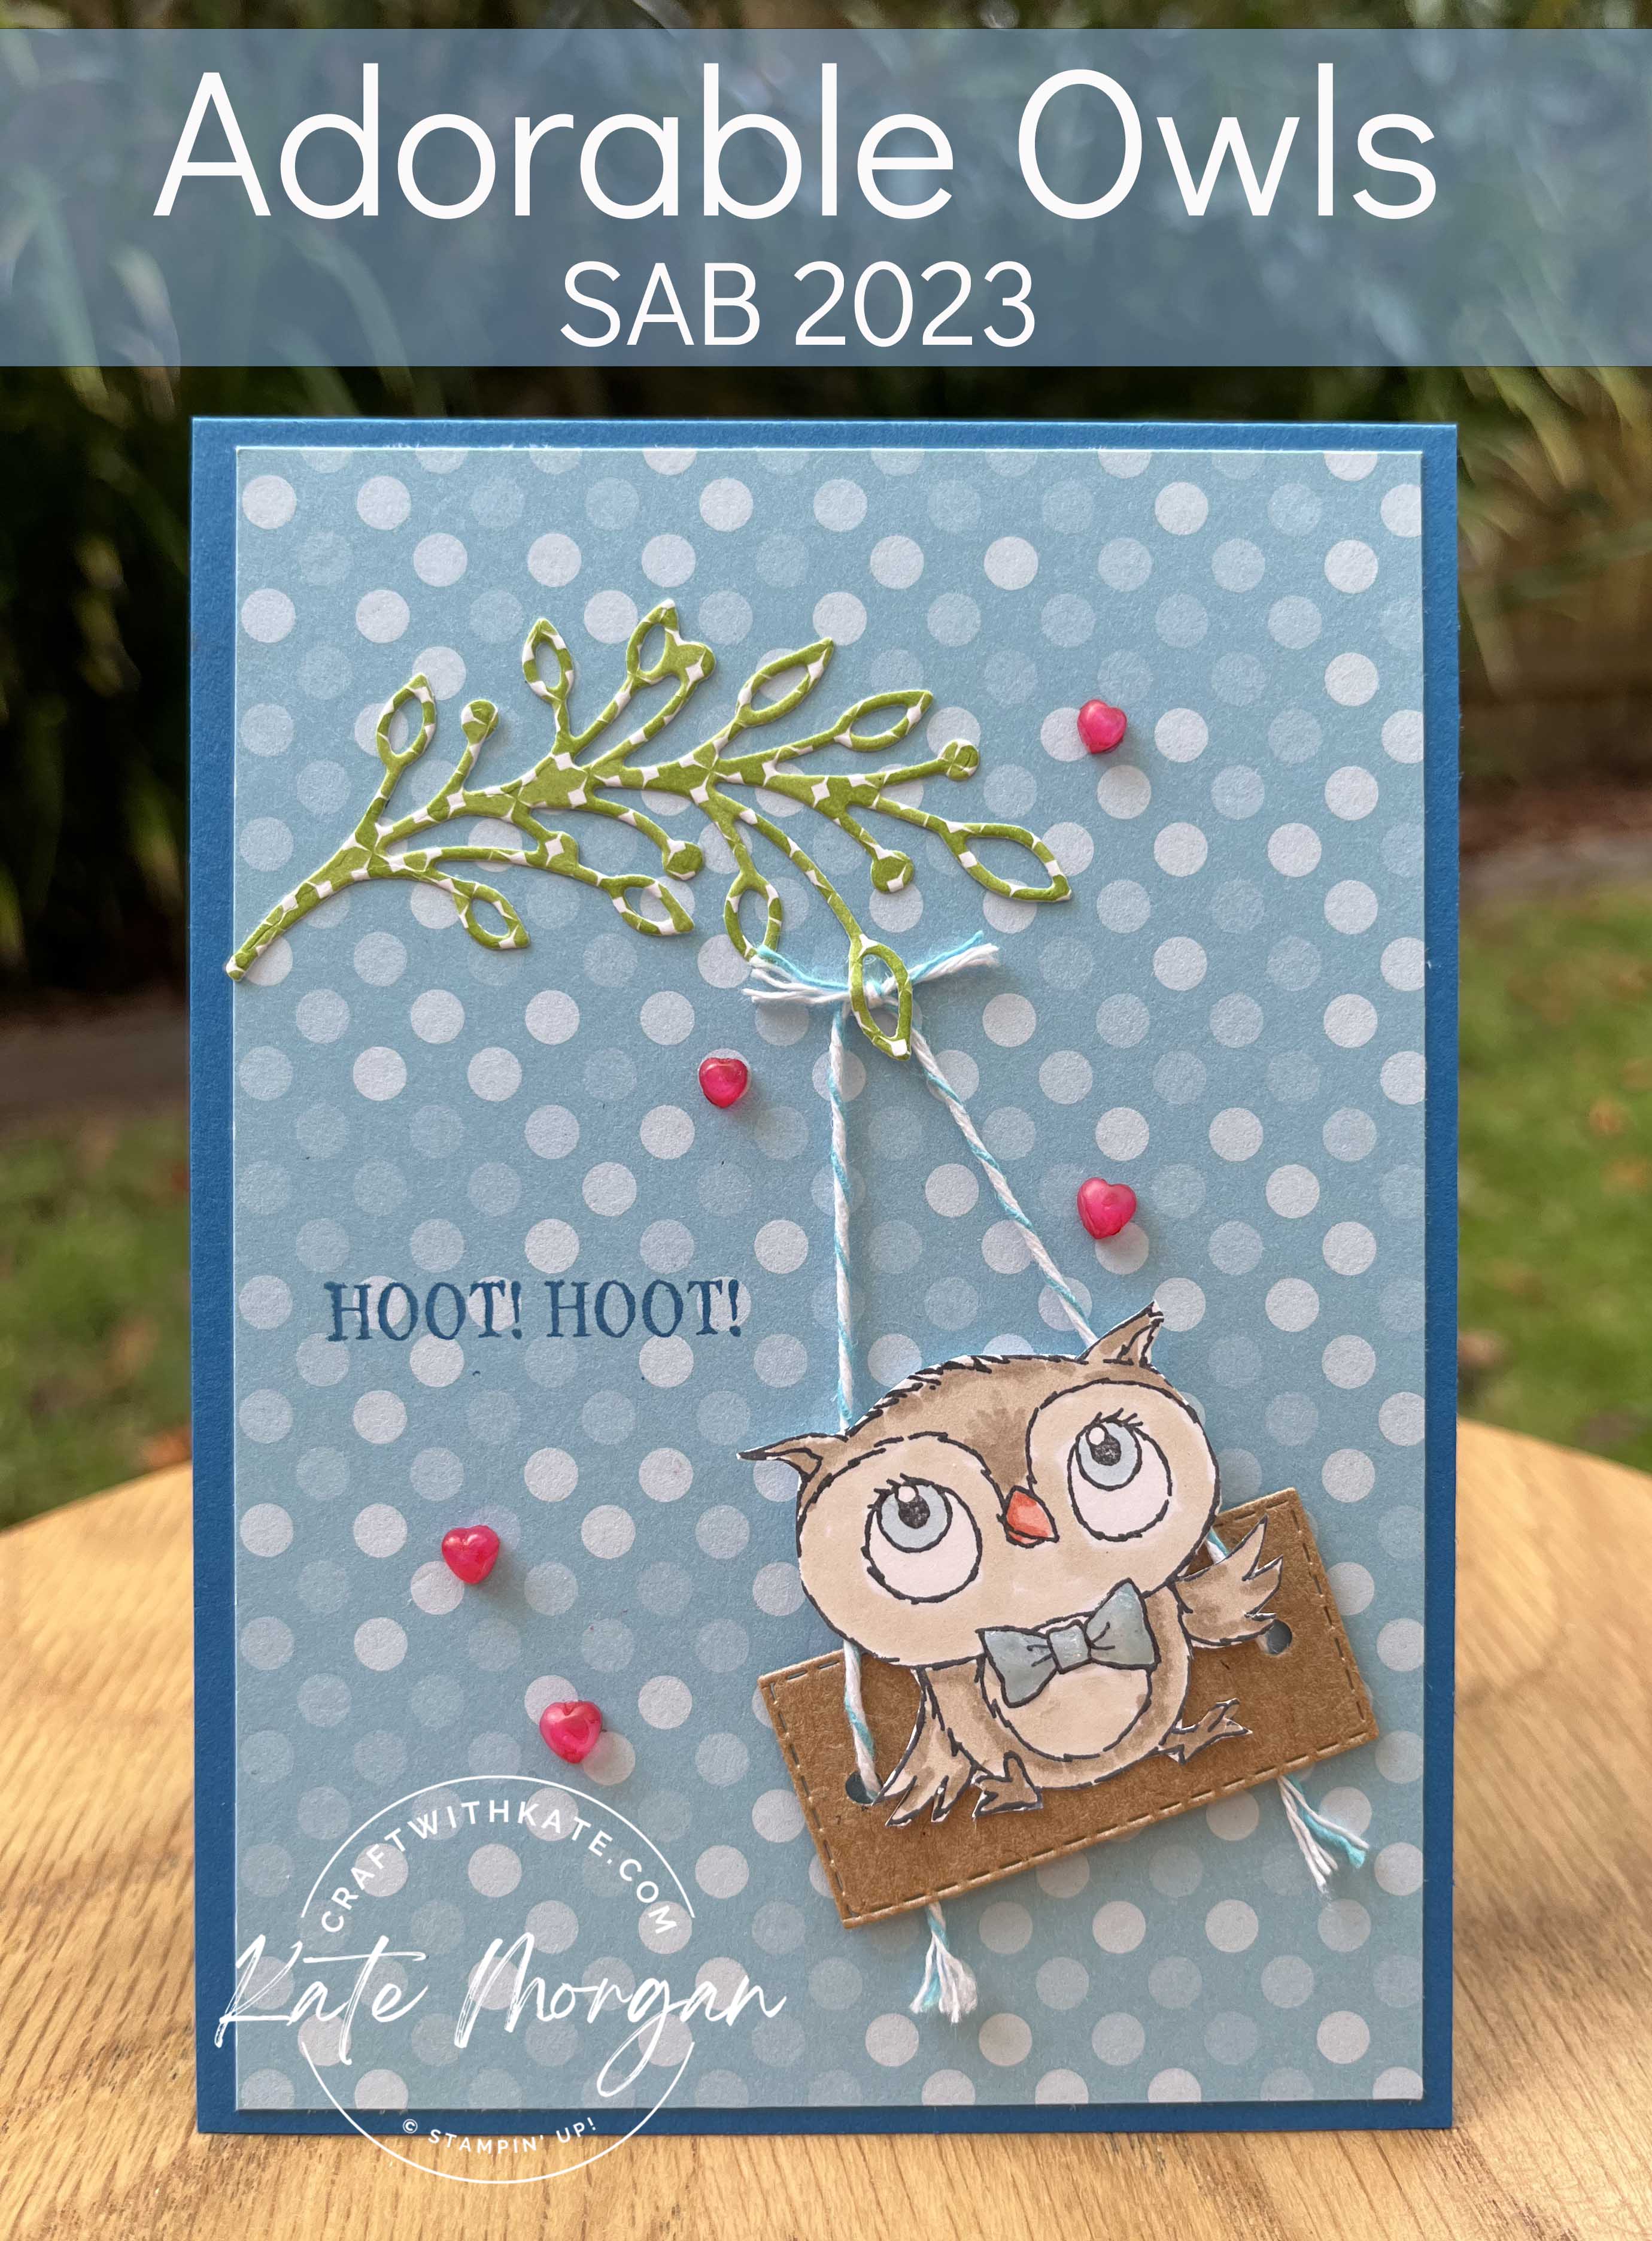 Adorable Owls on swing card for Pacific Point CCBH by Kate Morgan Stampin Up Australia SAB 2023